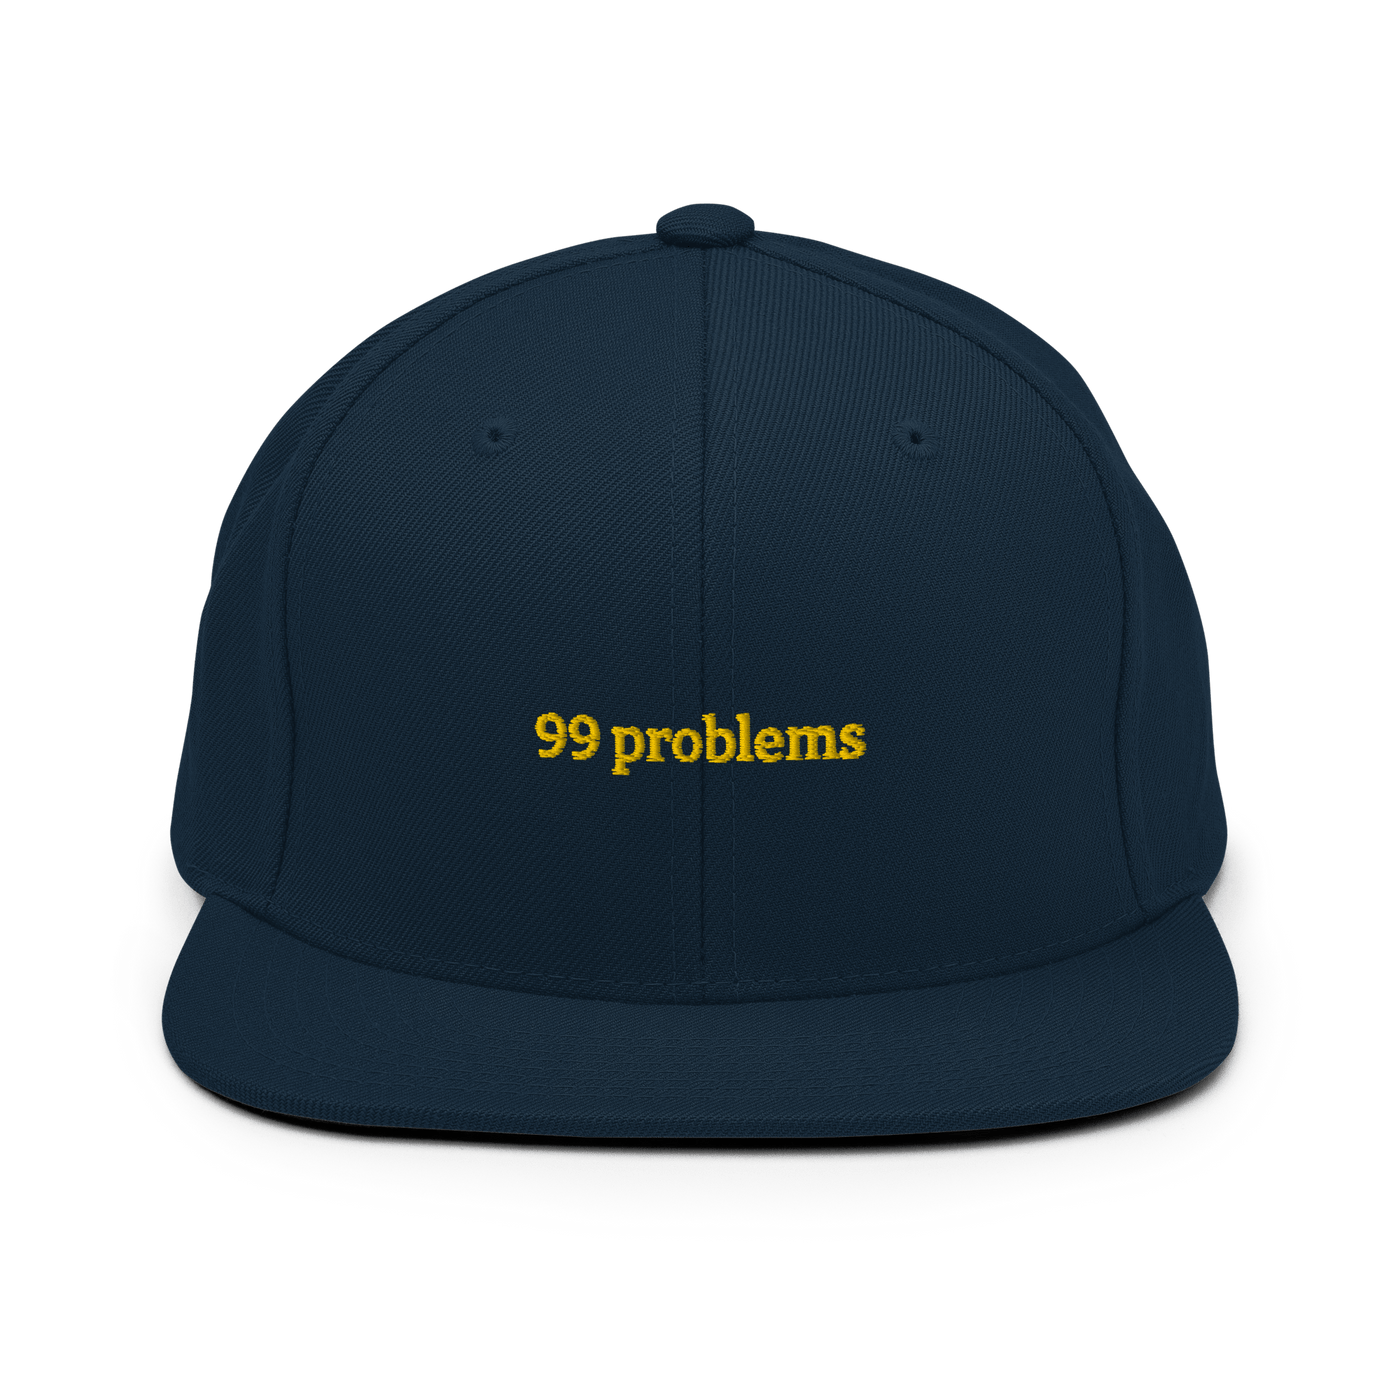 99 problems Snapback - Dark Navy - - Just Another Cap Store